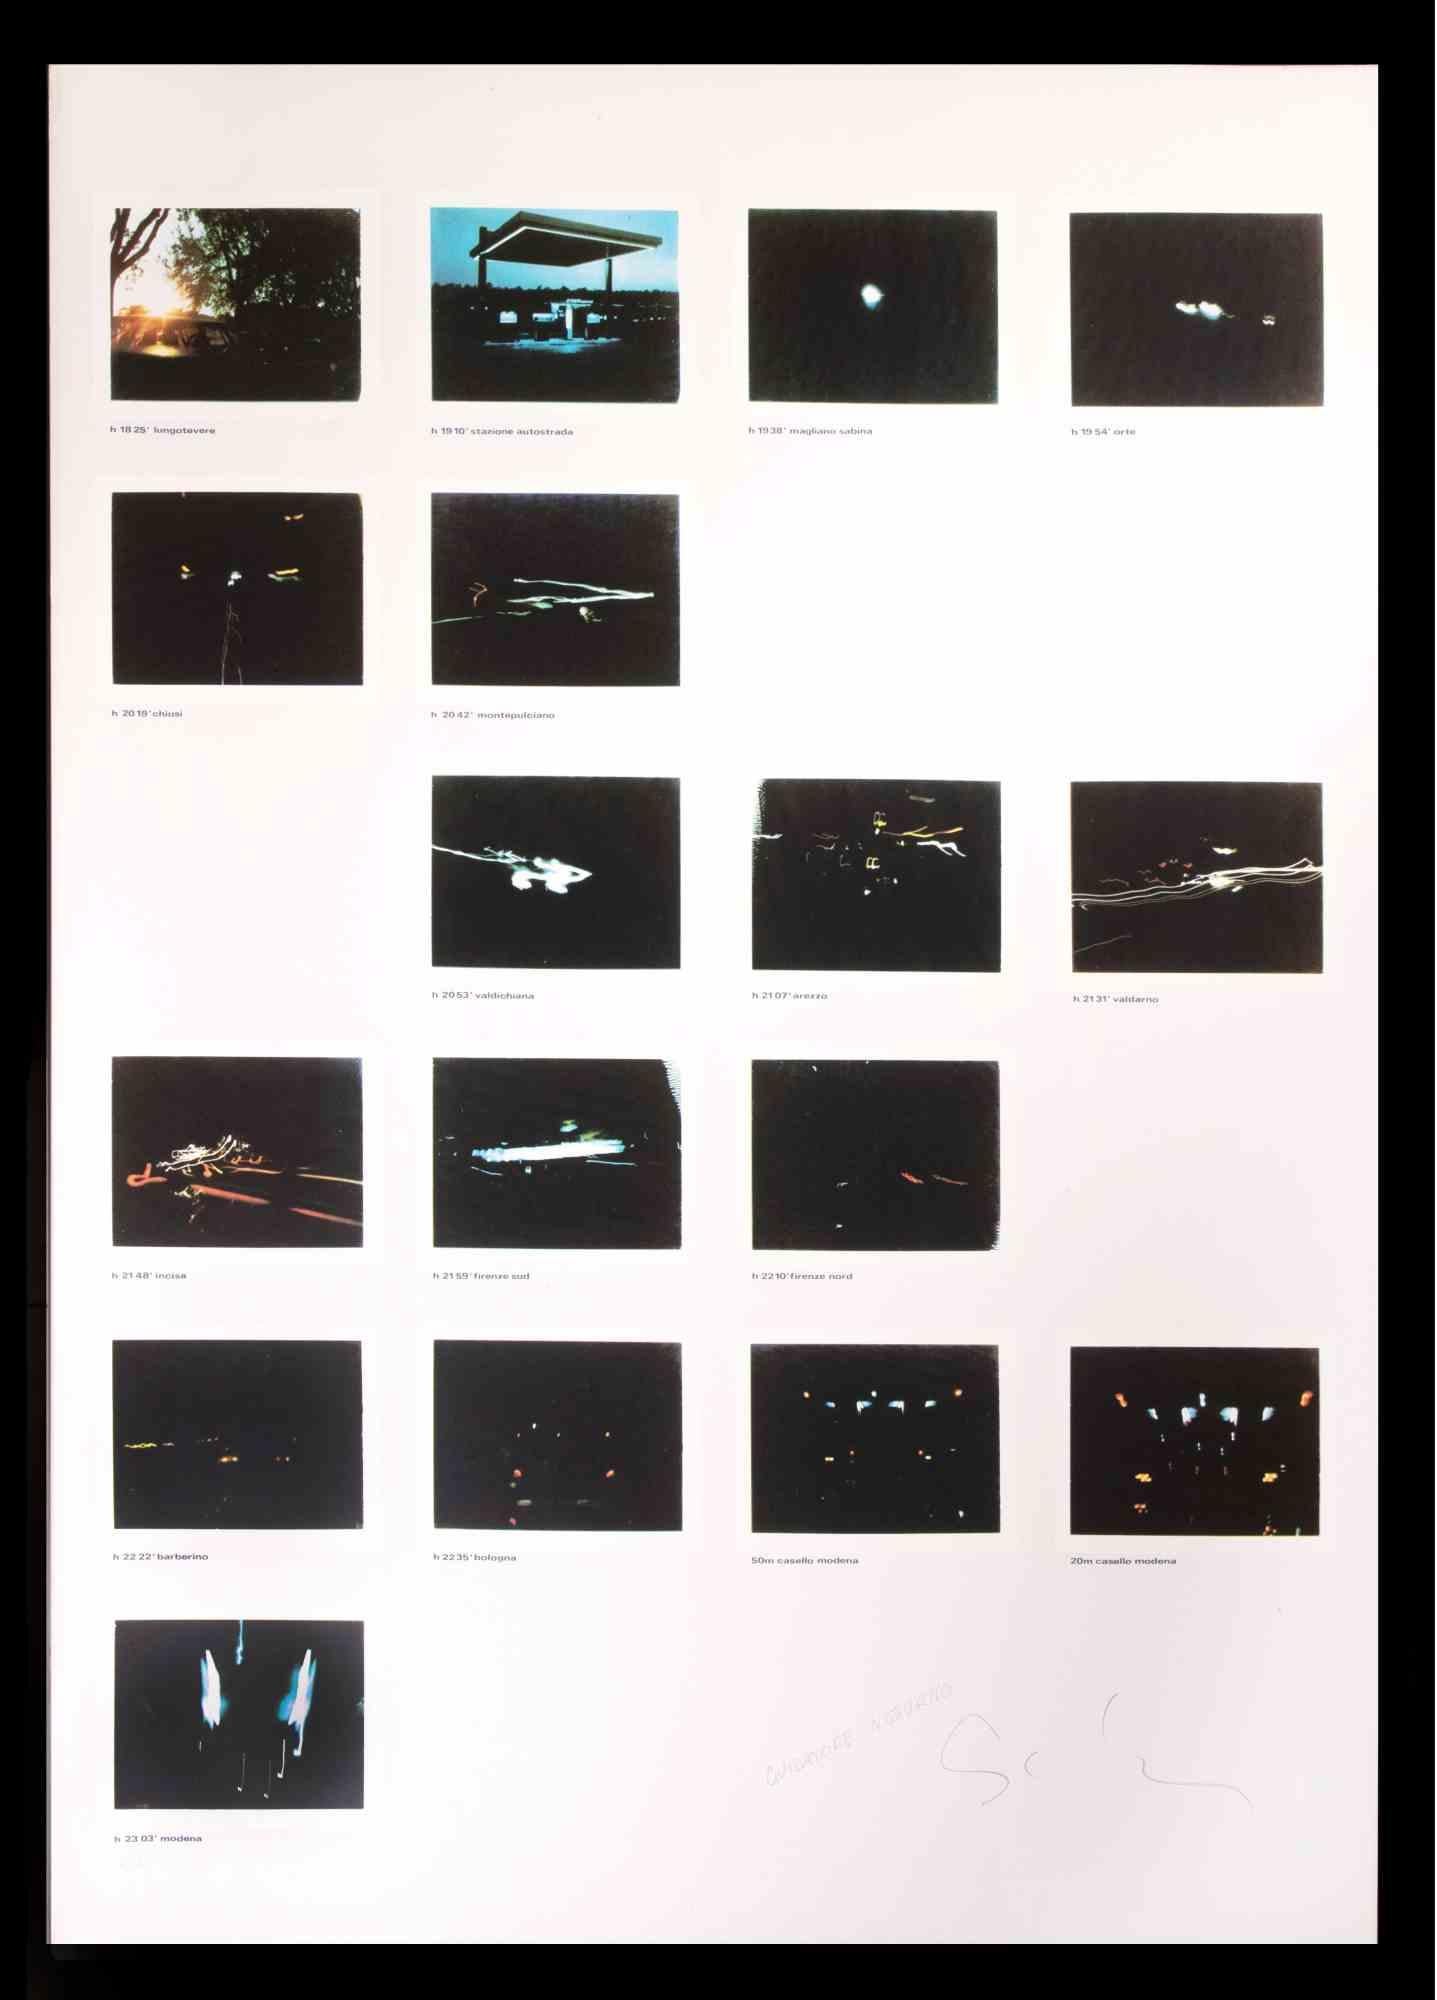 Night Driver is a contemporary artwork realized by Mario Schifano in the 1970s.

Hand-signed and titled on the lower margin.

Numbered on the lower left. Edition 57/60.

Good conditions.

The artwork represents 17 photographs in different places and